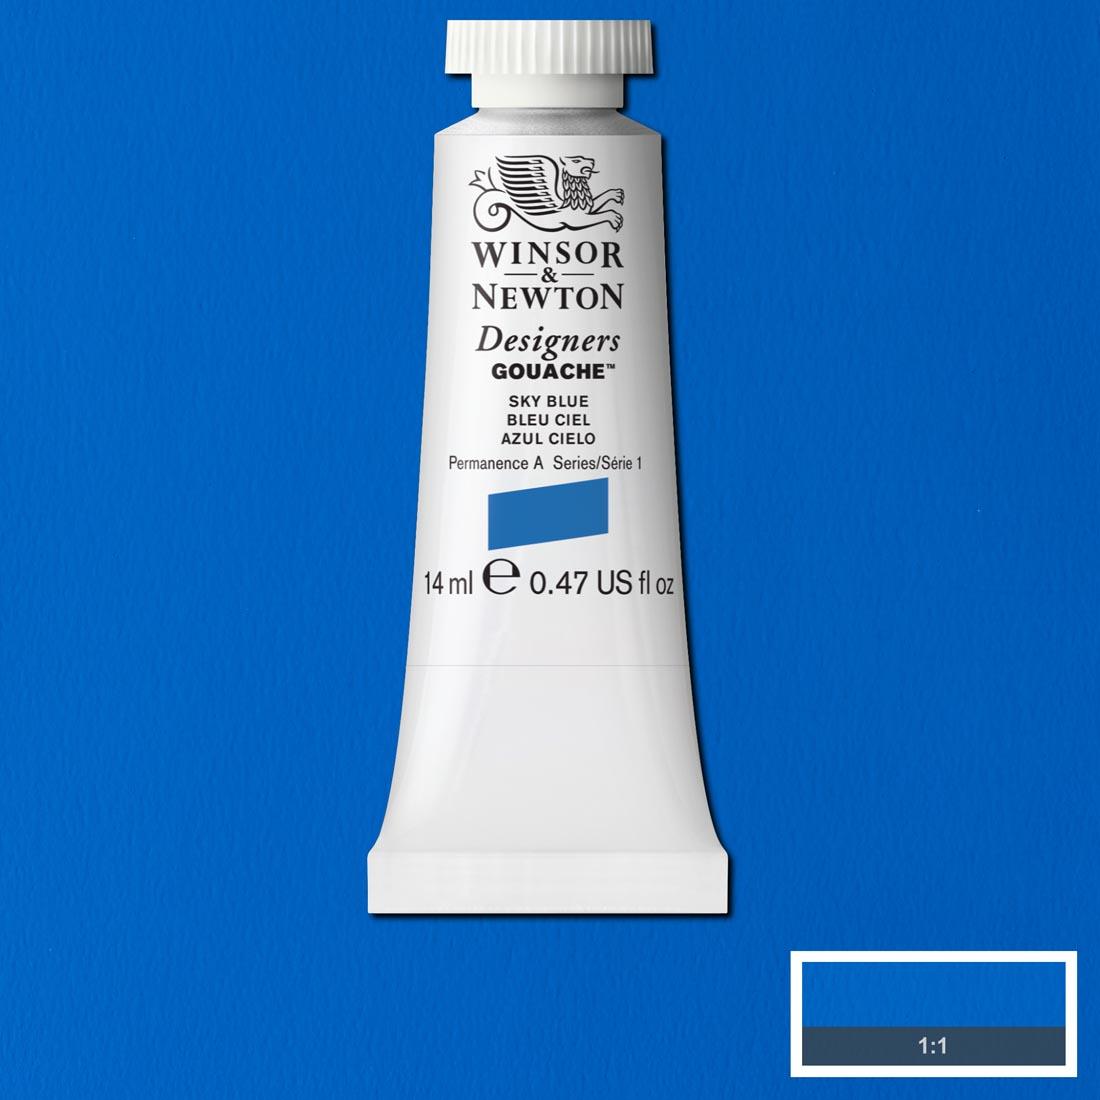 Tube of Sky Blue Winsor & Newton Designers Gouache with a paint swatch for the background